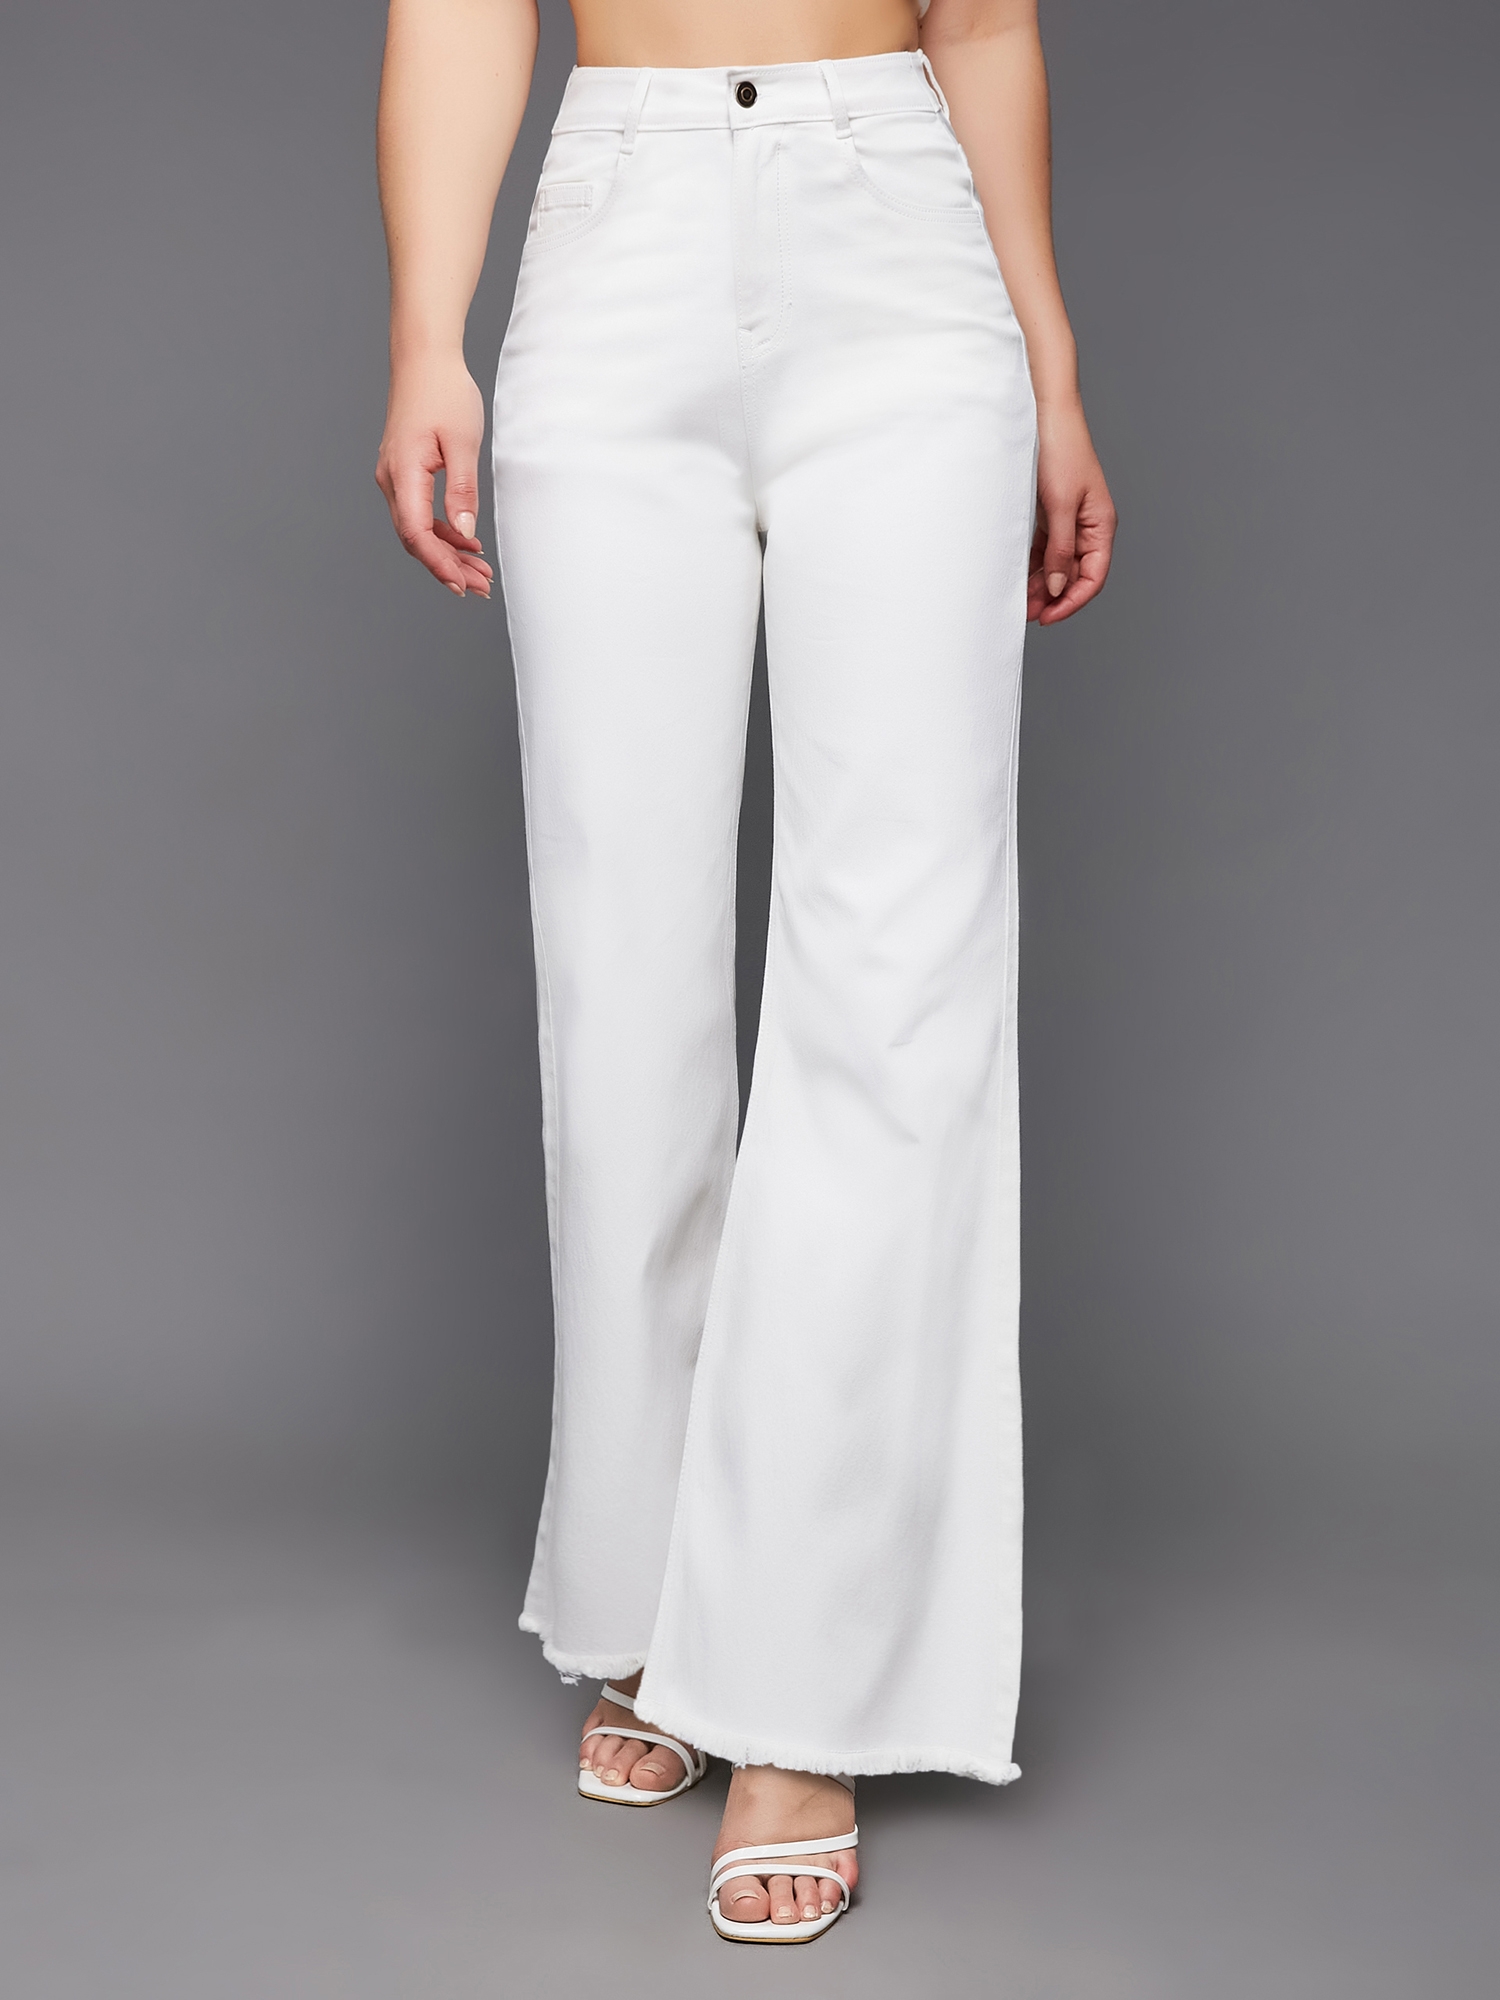 MISS CHASE | Women's White Solid Bootcut Jeans 0